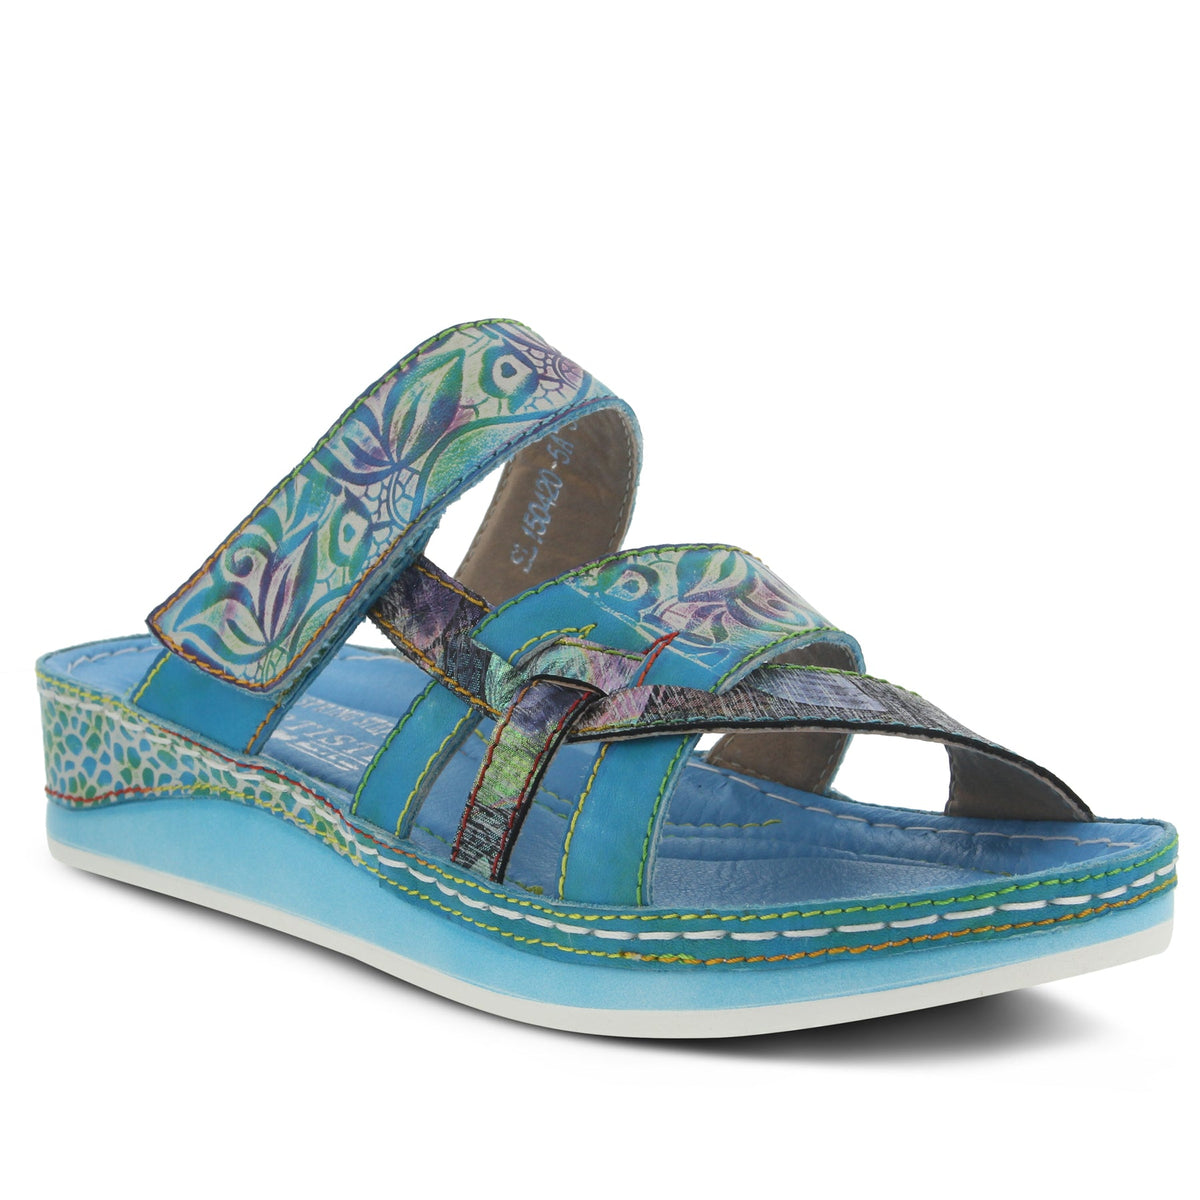 Teal Turquoise Blue Aqua Multi Colored Floral Leather Womens Slide Sandal Rainbow Contrast Stitching French European Shoe